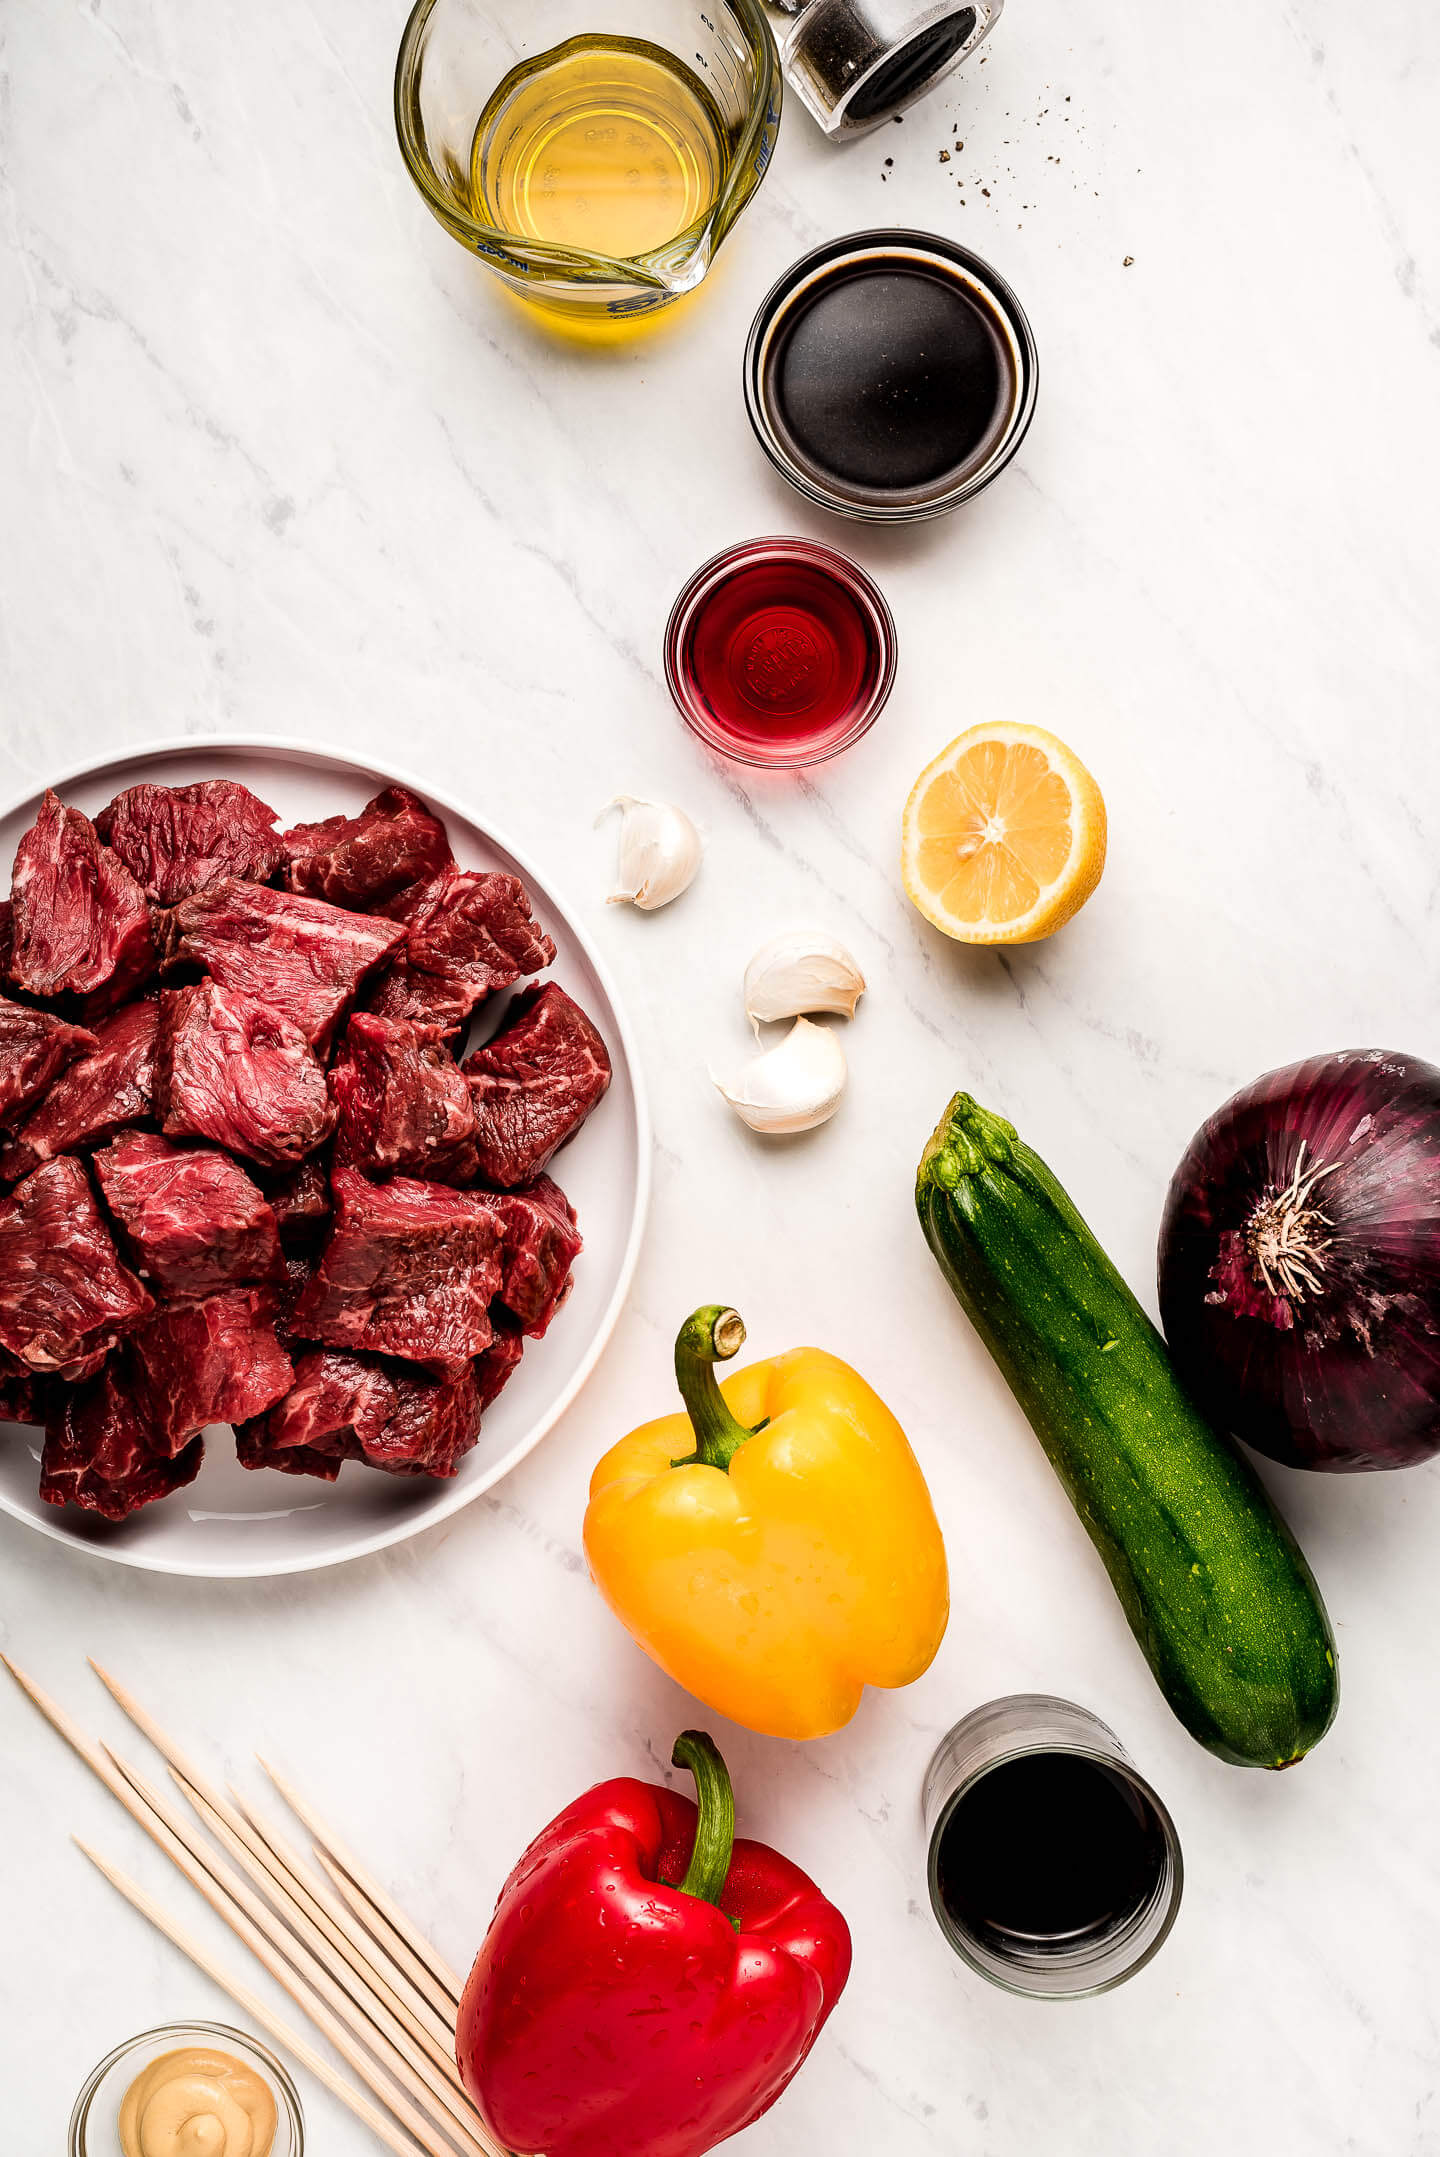 Ingredients on a marble surface- oil, soy sauce, vinegar, lemon, beef, peppers, zucchini, onion, and skewers.